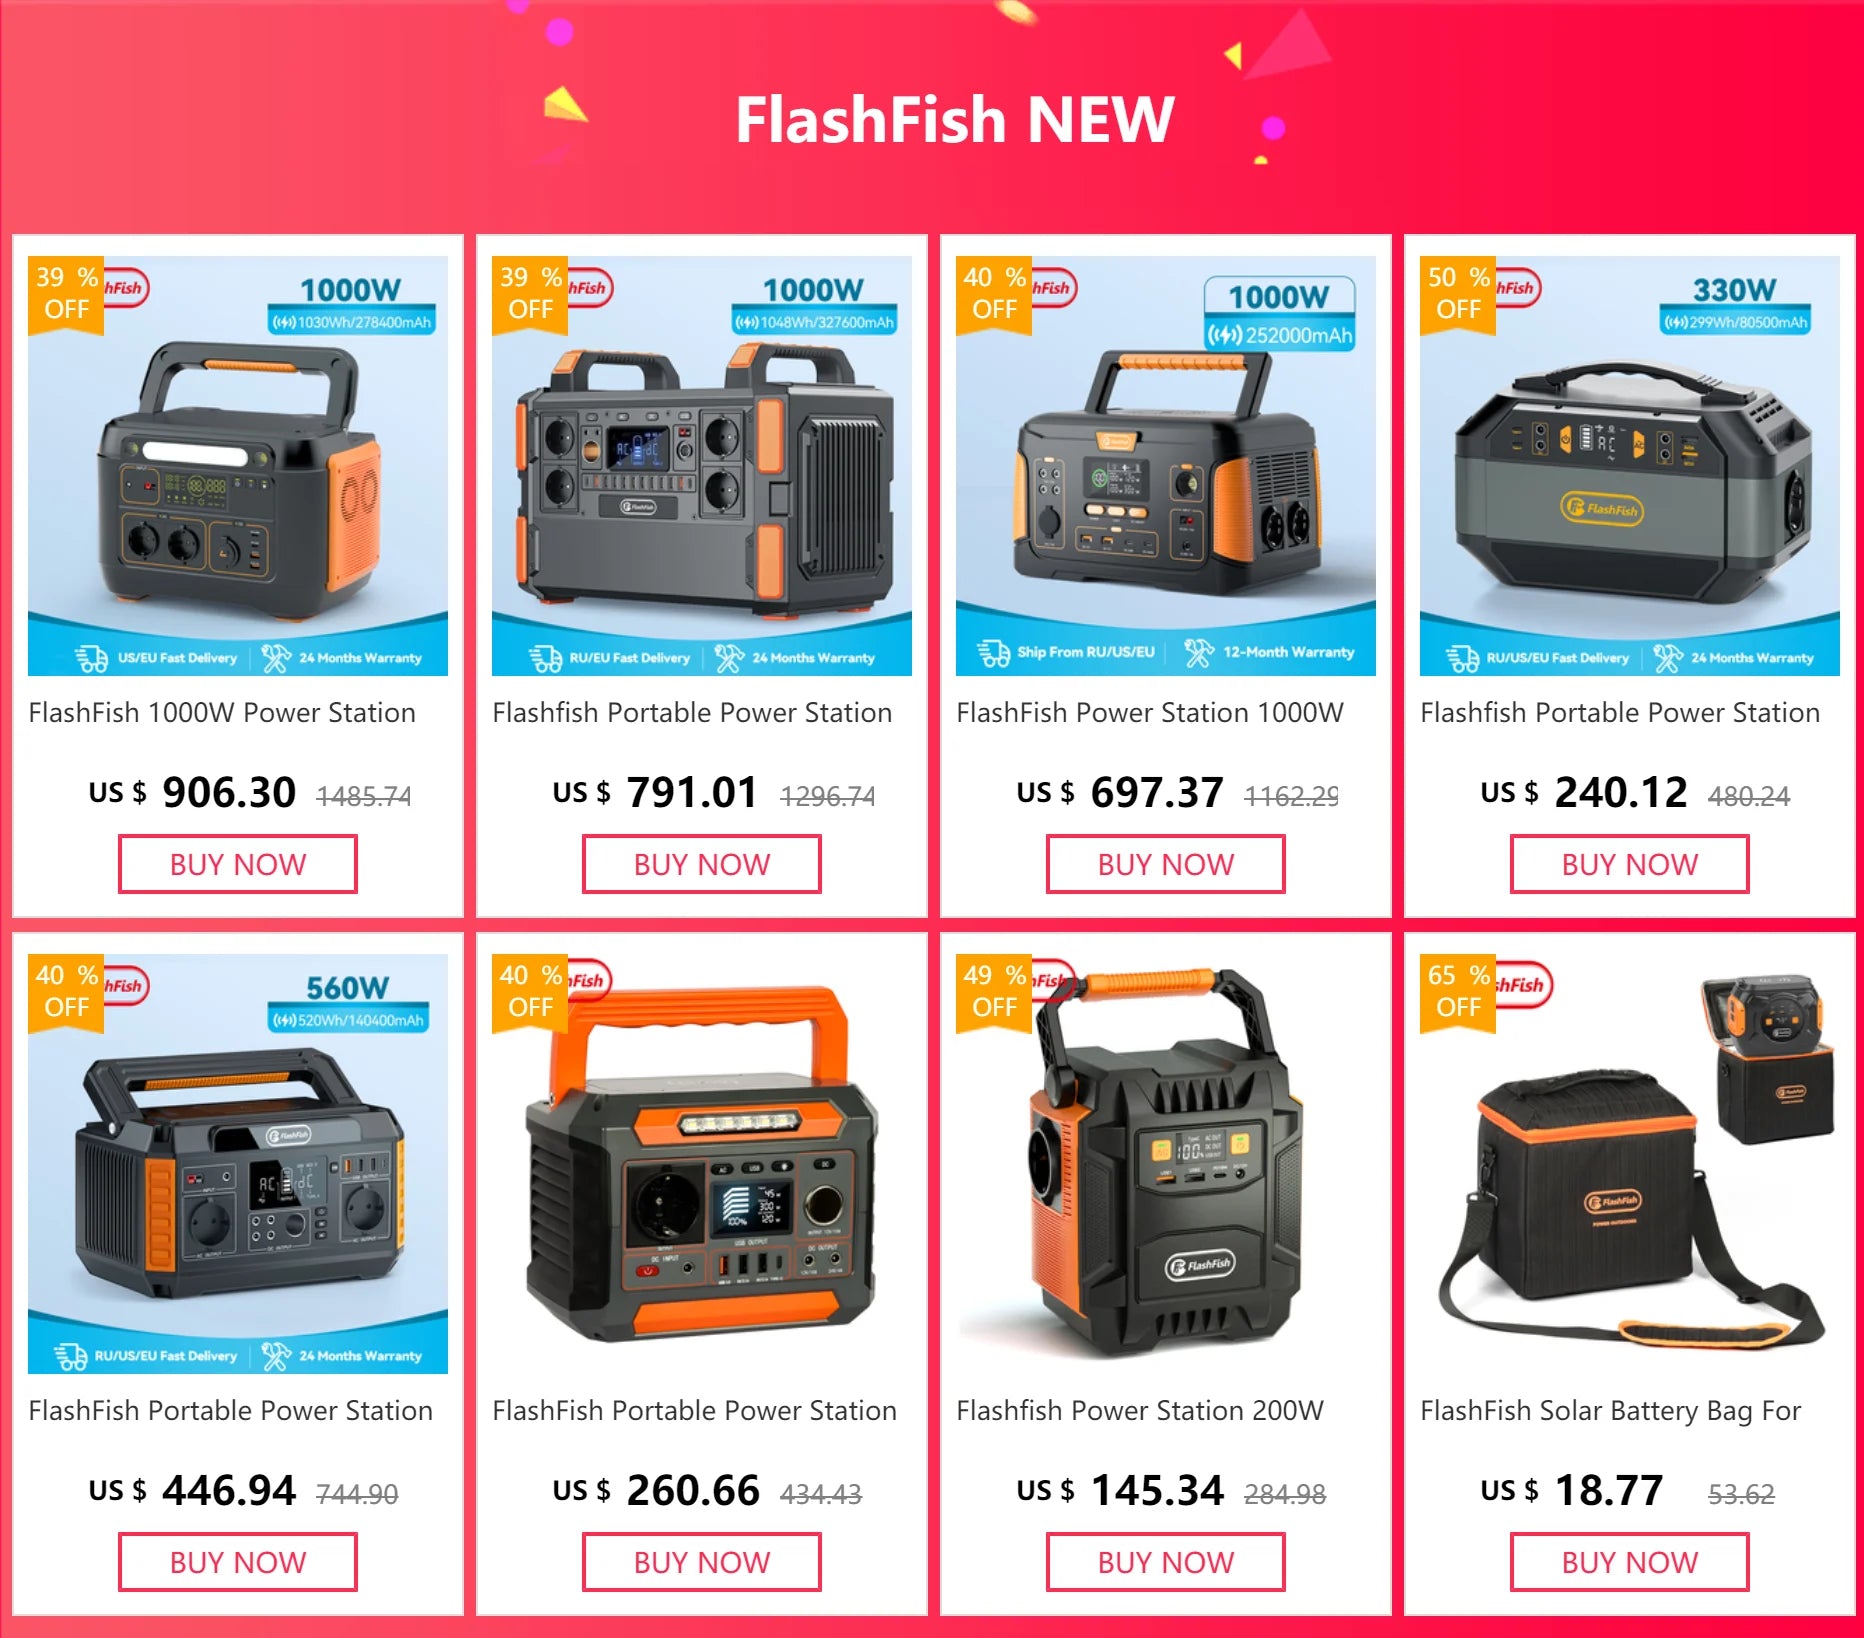 FlashFish Solar Panel 100W: Portable charger for power stations, vans, and camping trips with fast delivery and 24-month warranty.